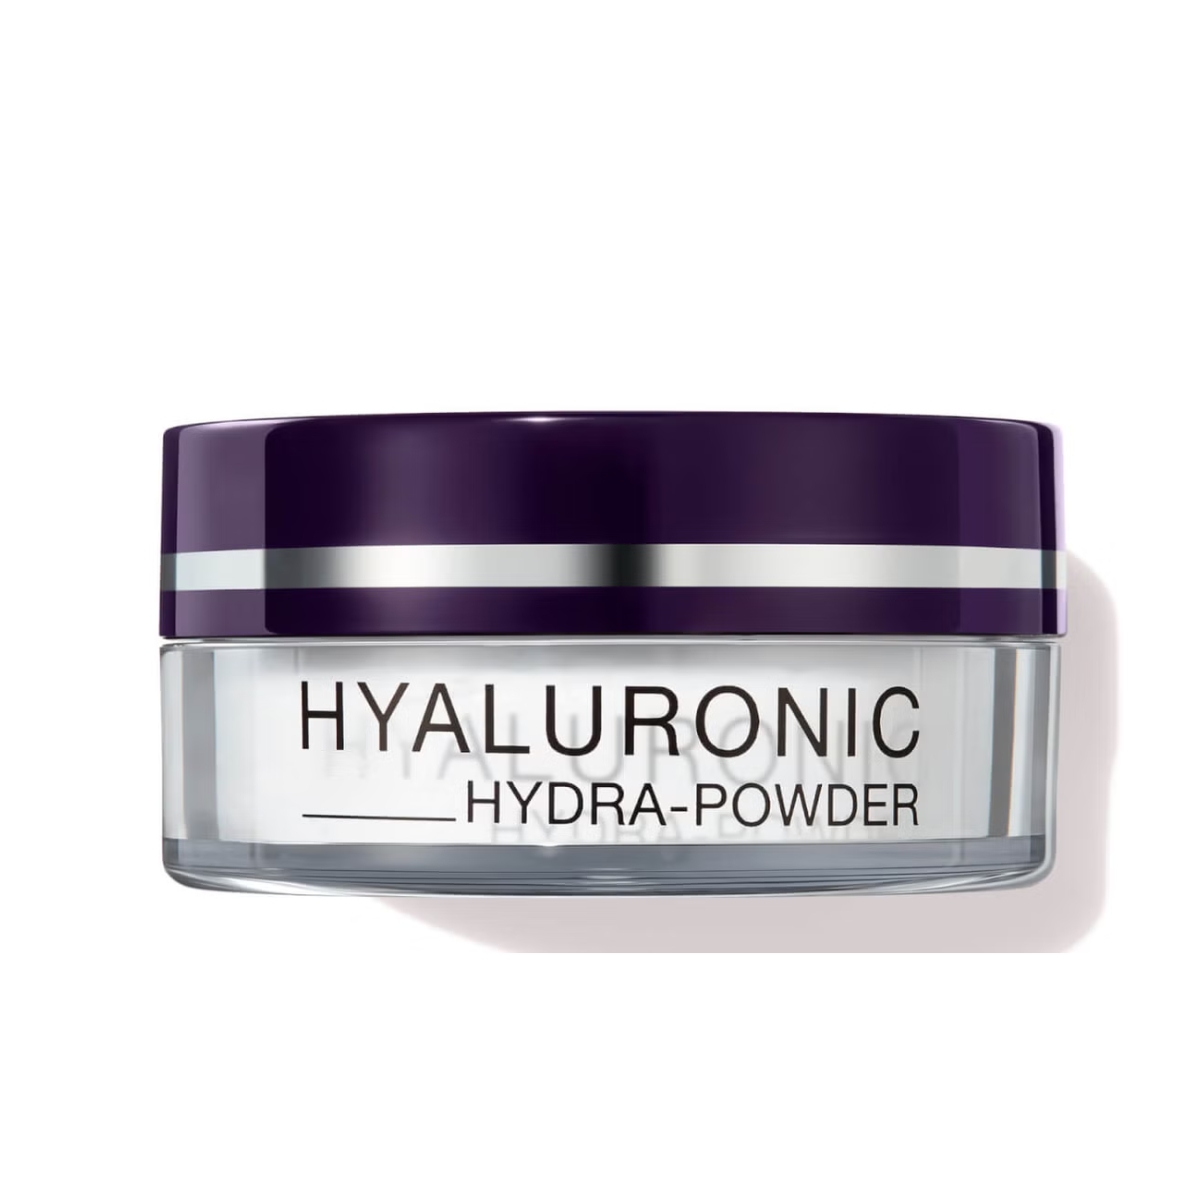  By Terry Hyaluronic Hydra-Powder